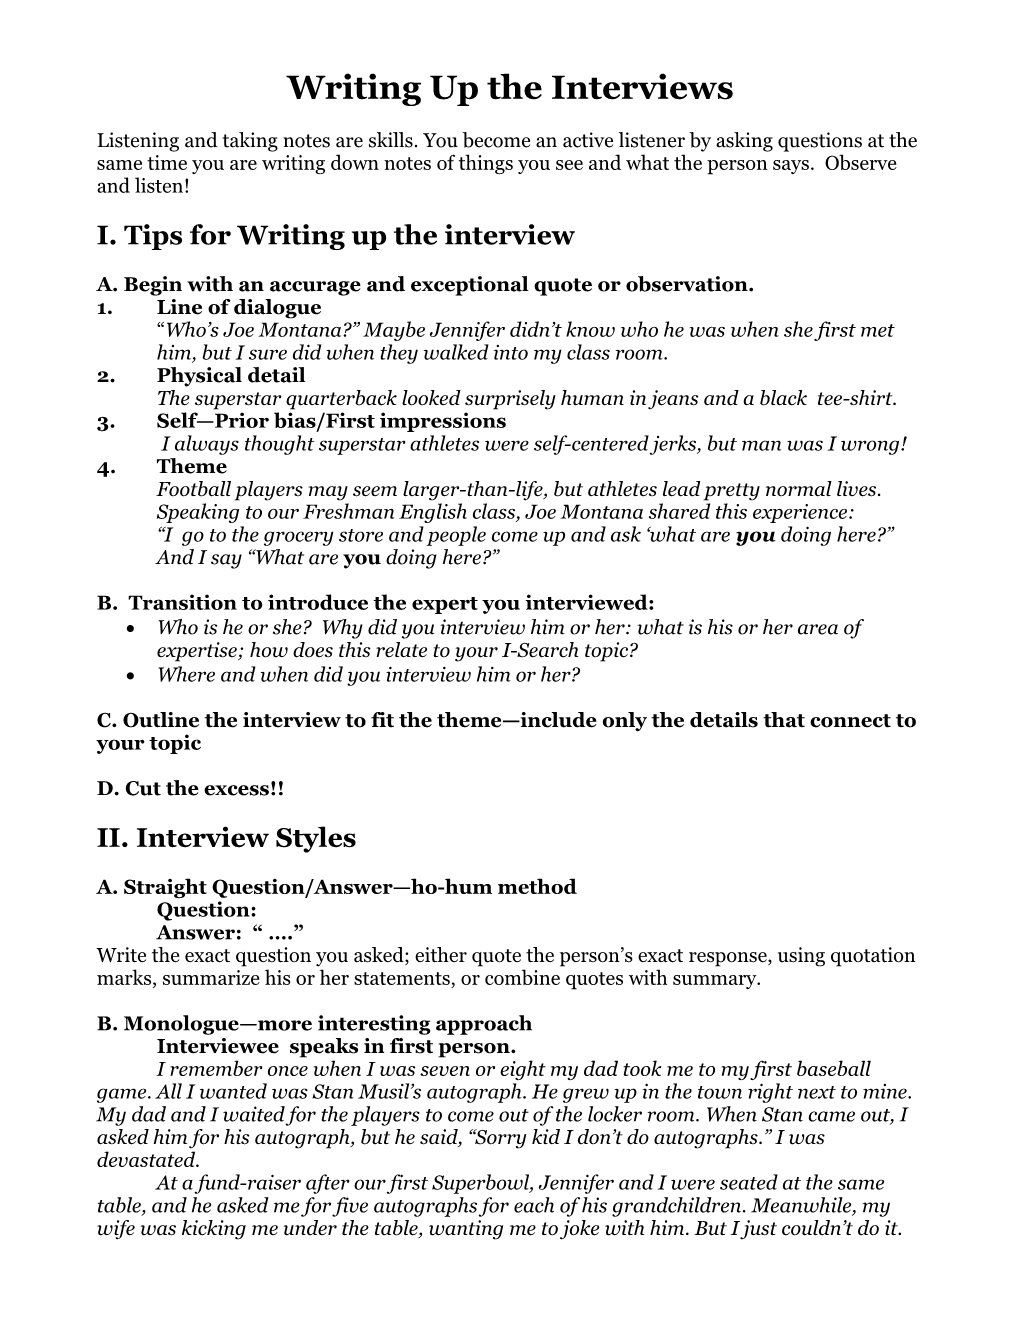 Hints for Writing the Interviews